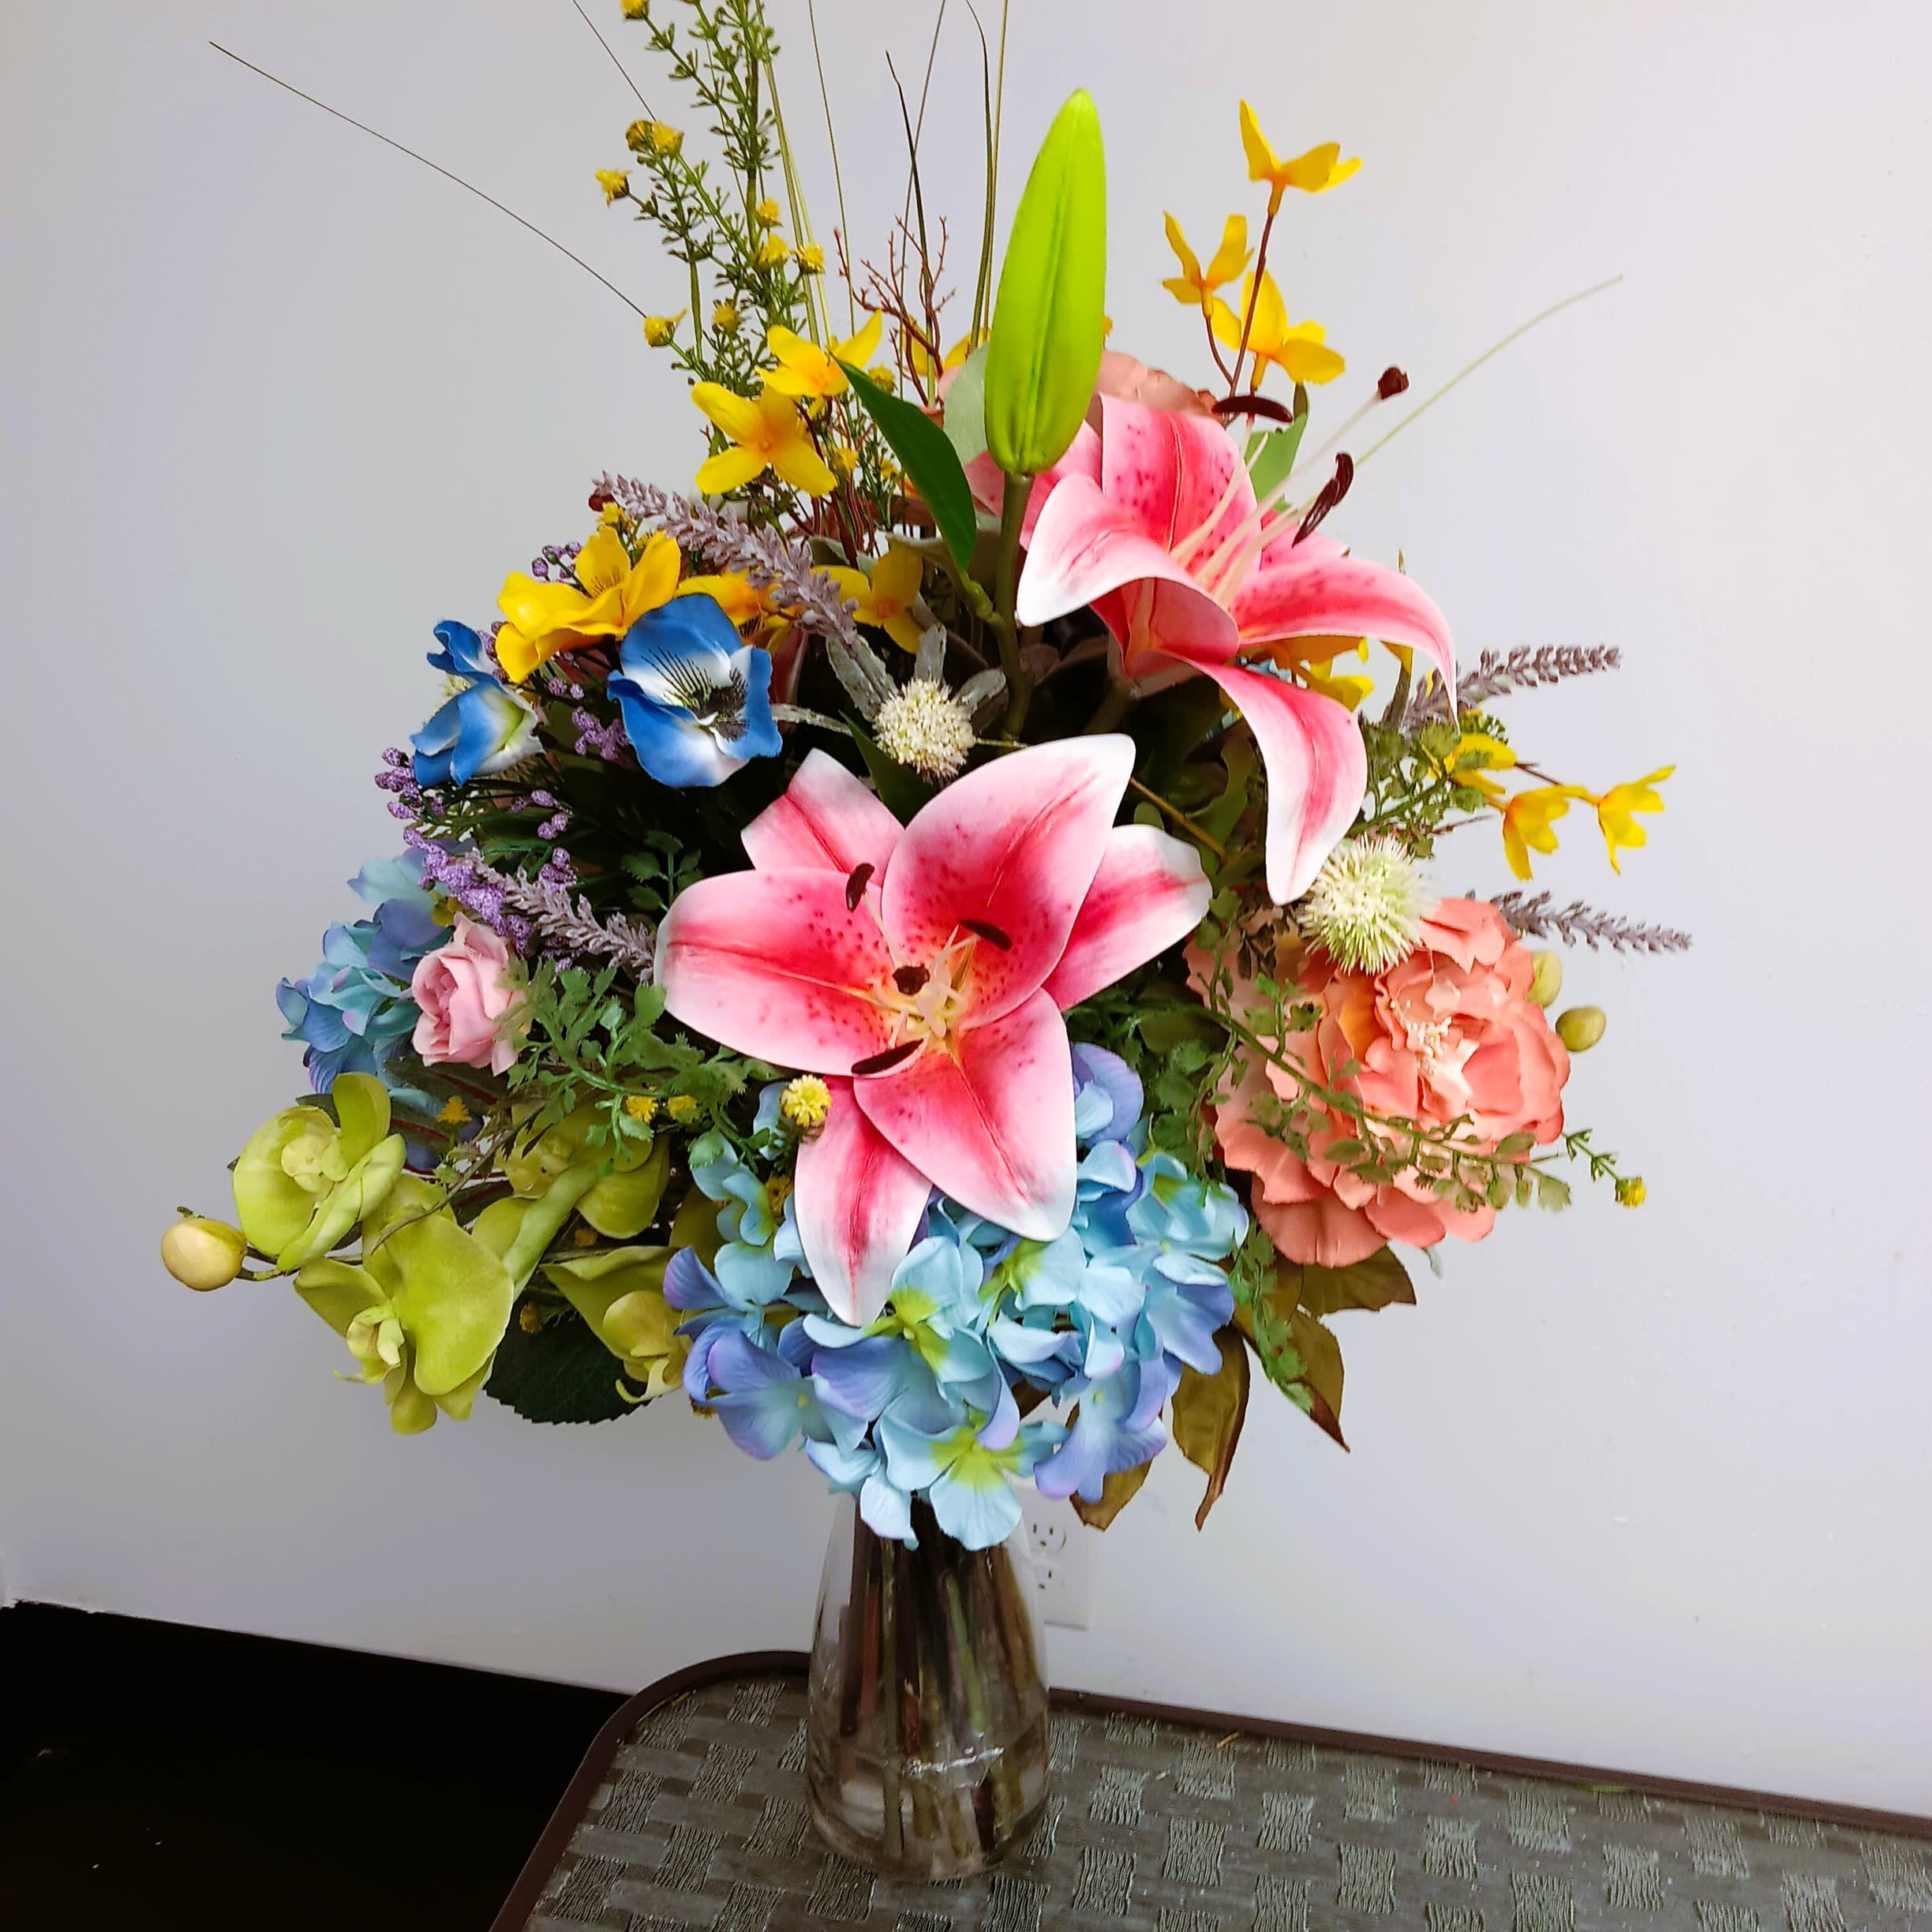 Stargazer Star. - Order this stunning silk floral arrangement from our Permanent Botanicals collection. It's great for any occasion. We deliver!